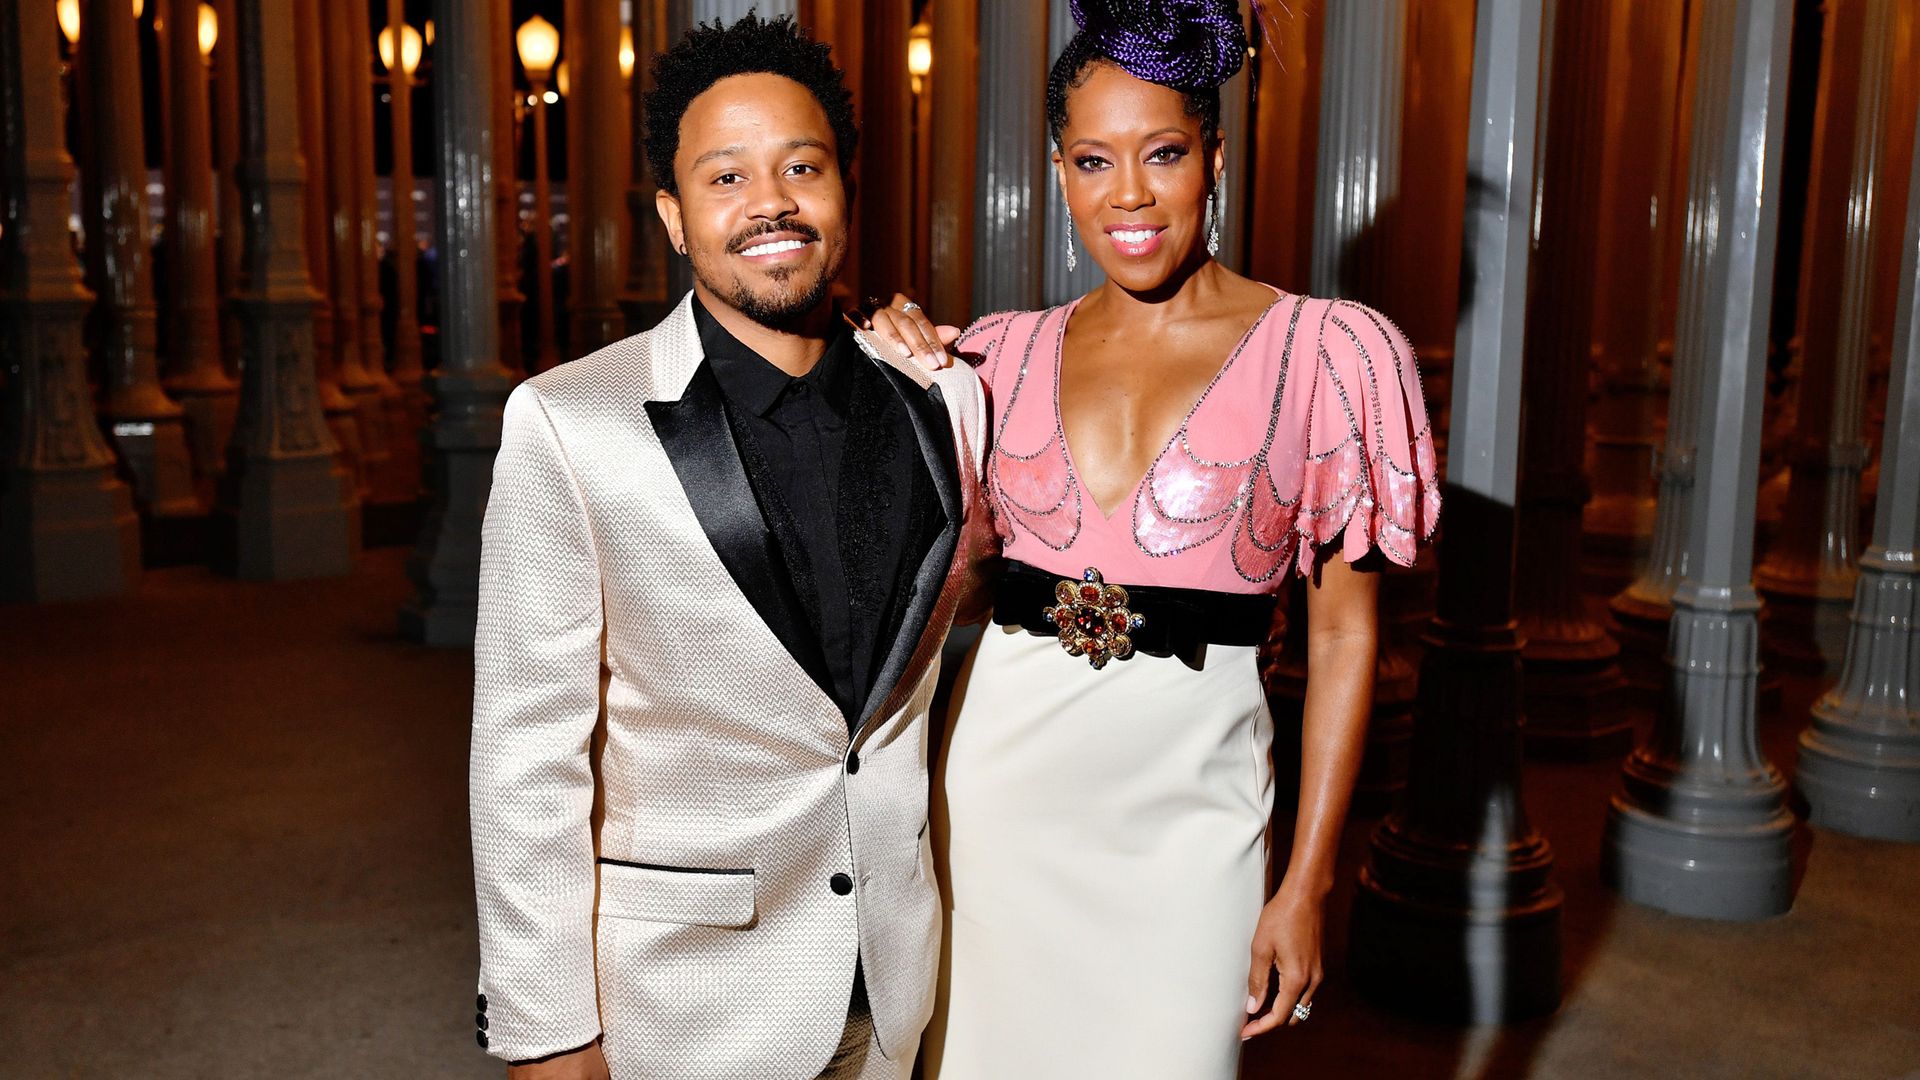 In 2022, Regina King's son committed suicide